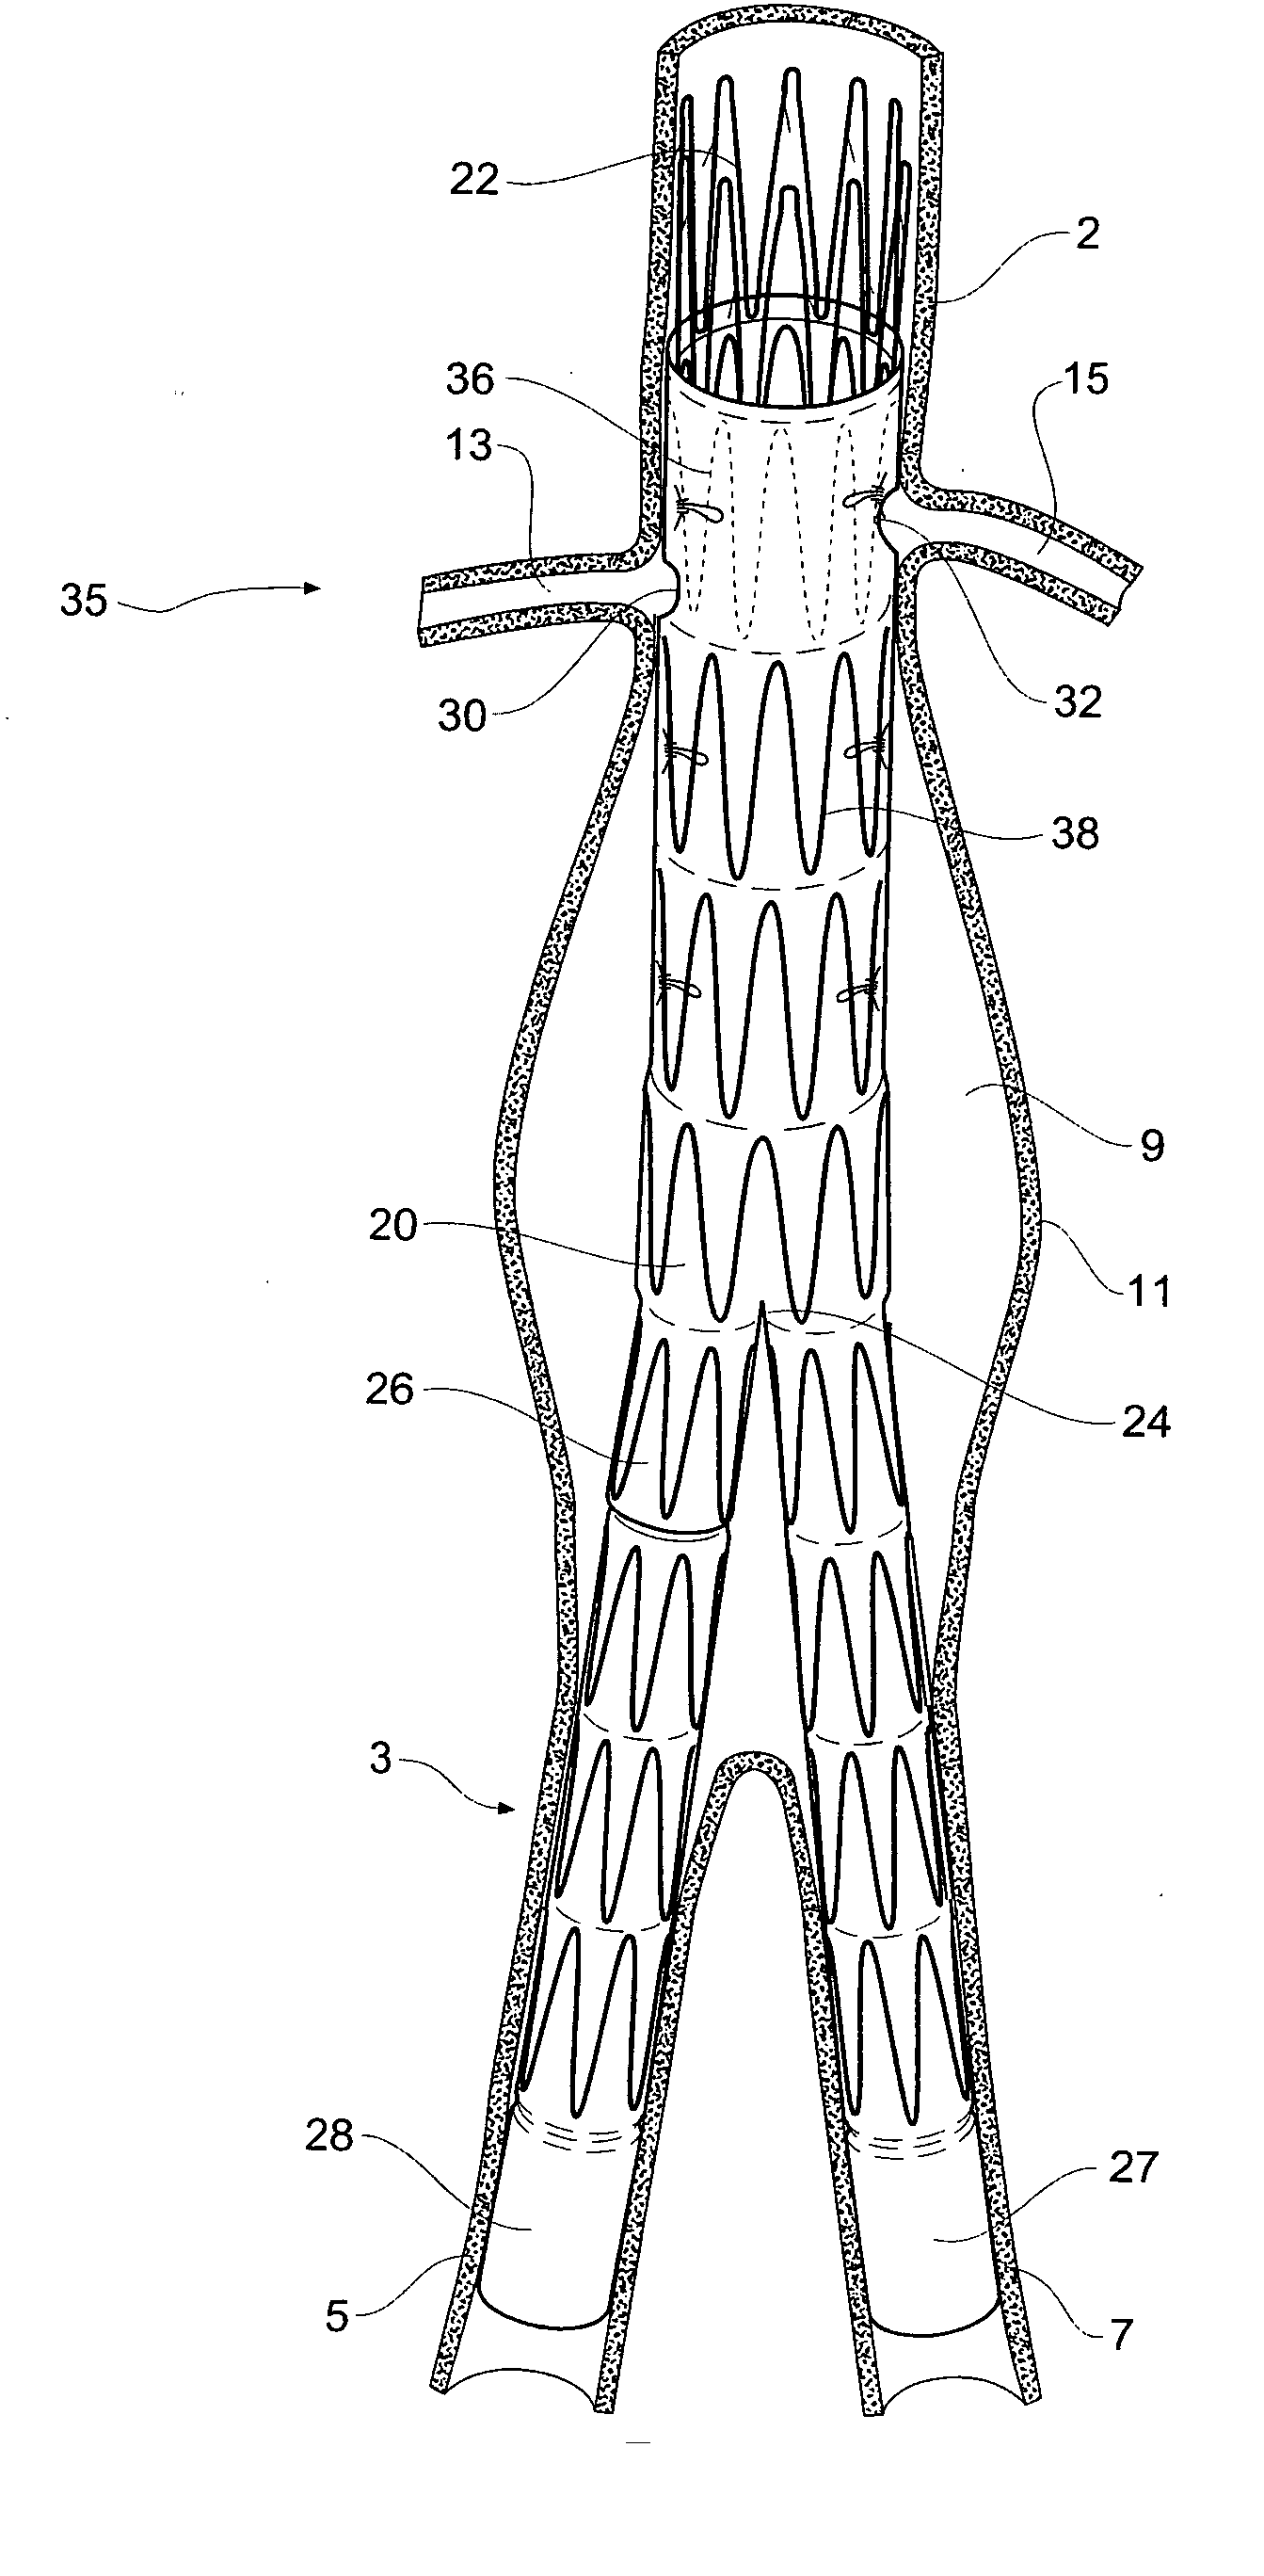 Design and assembly of fenestrated stent grafts